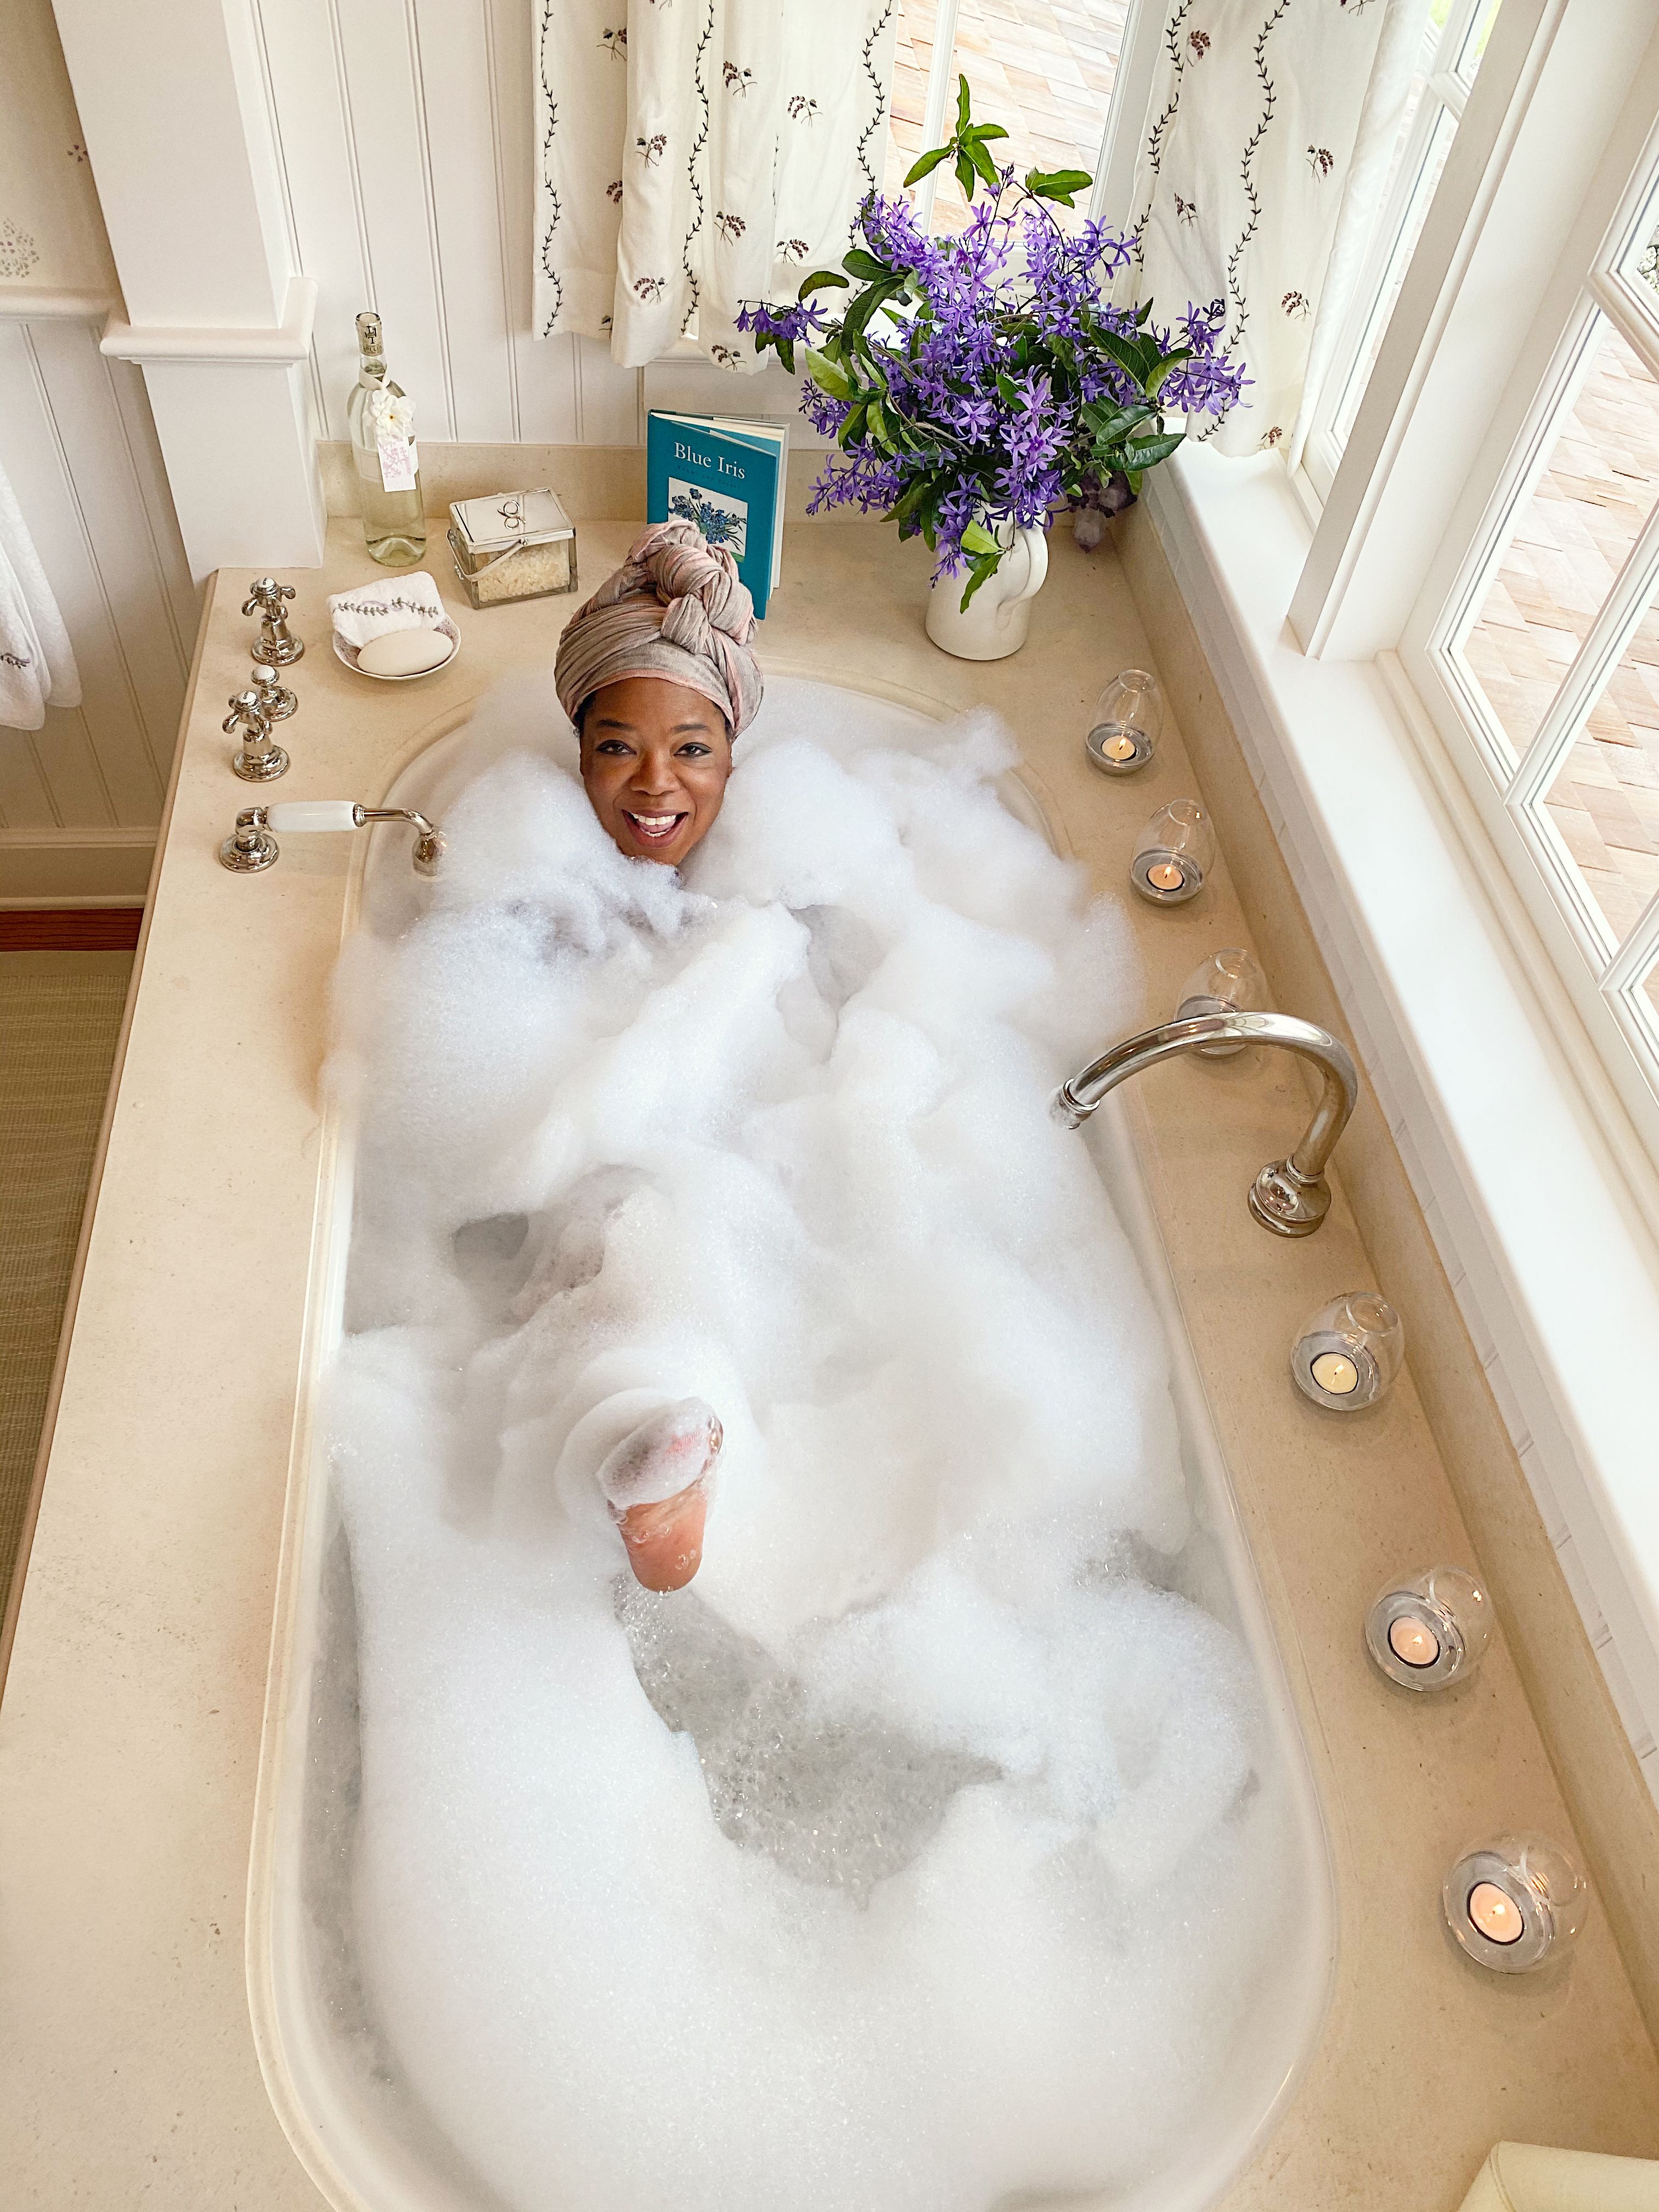 Oprah Reveals Her Bath Routine In, How Much Does It Cost To Fill A Bathtub With Hot Water